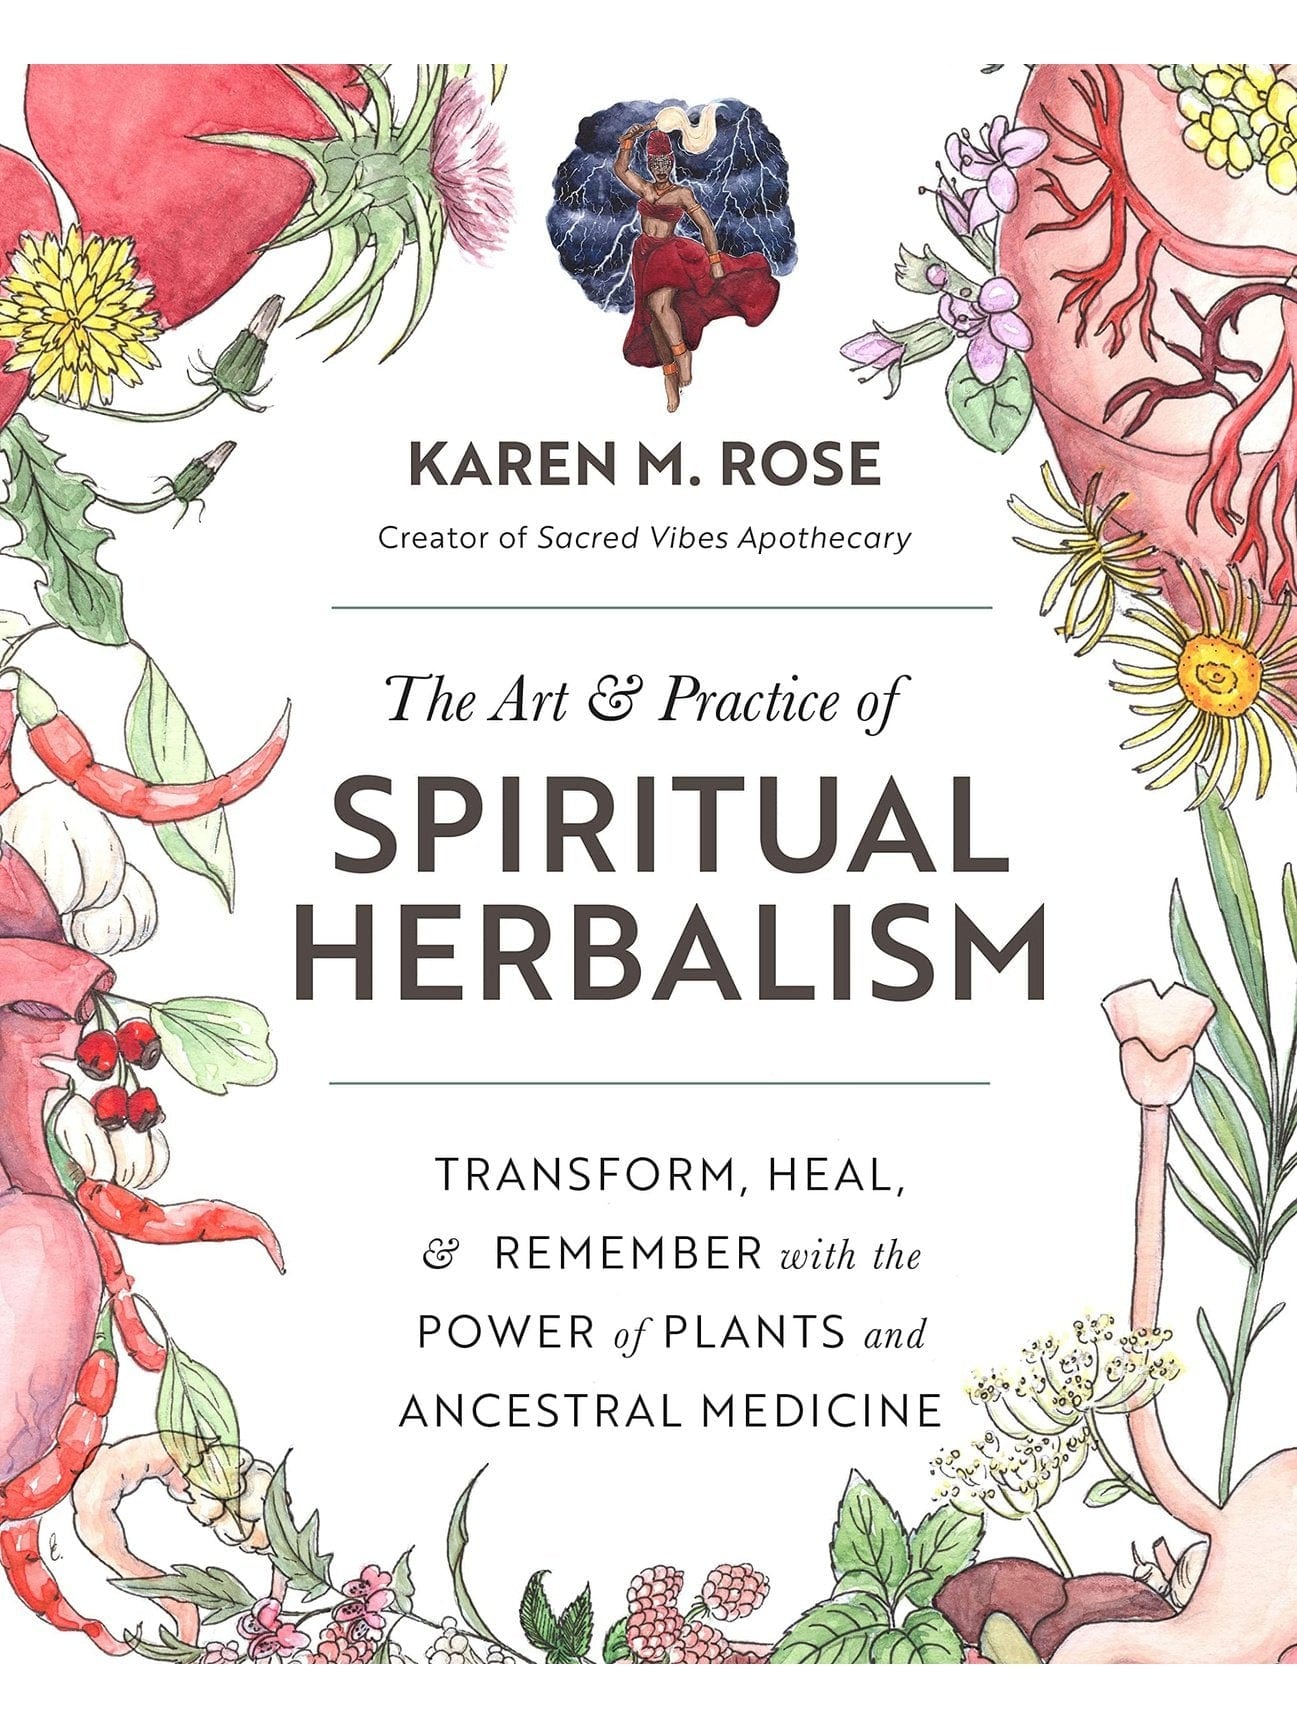 The Art & Practice of Spiritual Herbalism: Transform, Heal, and Remember with the Power of Plants and Ancestral Medicine | bki0760371792 | Default Title | Shamans Market